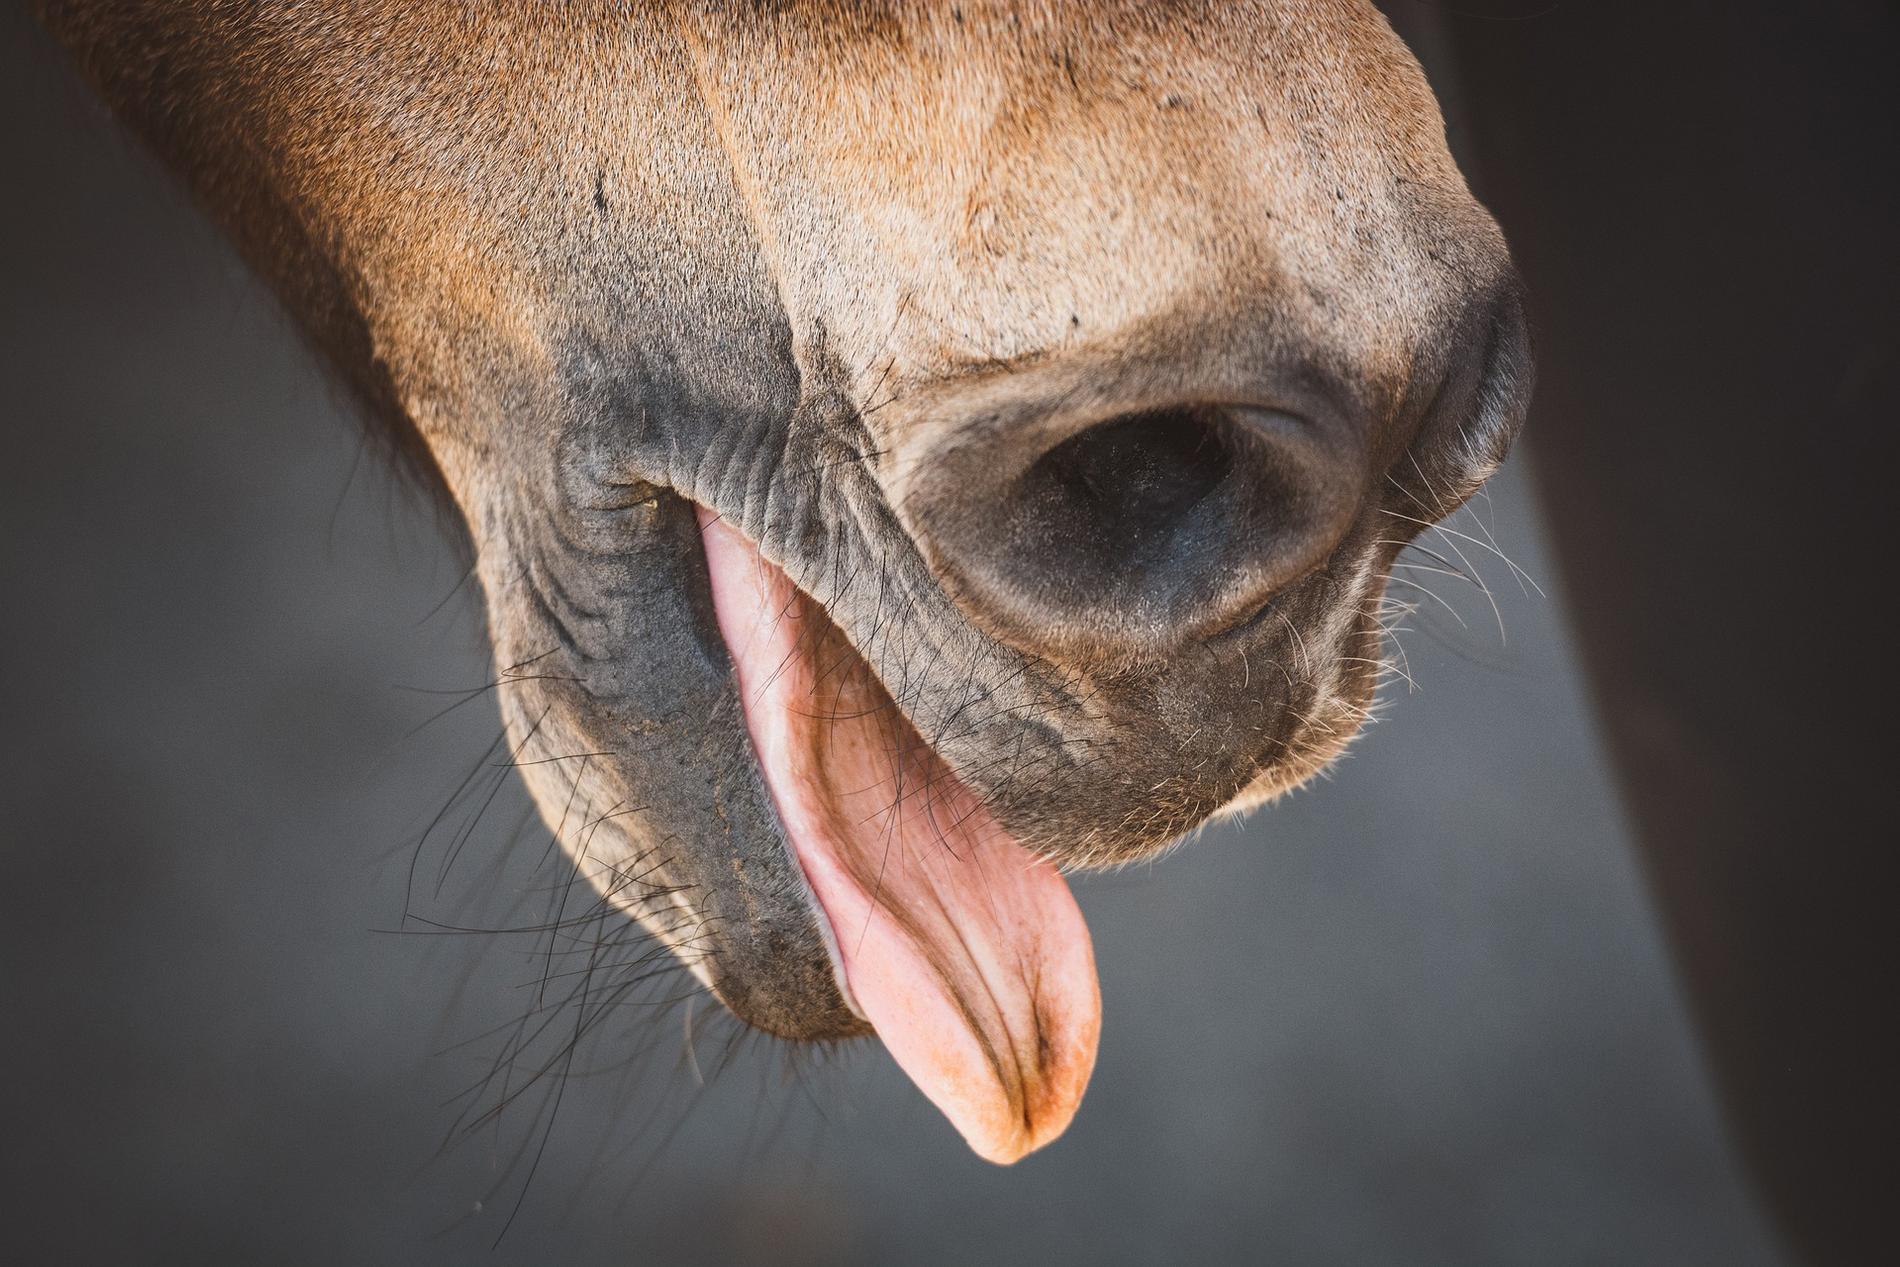  A horse's tongue is usually a light pink color.